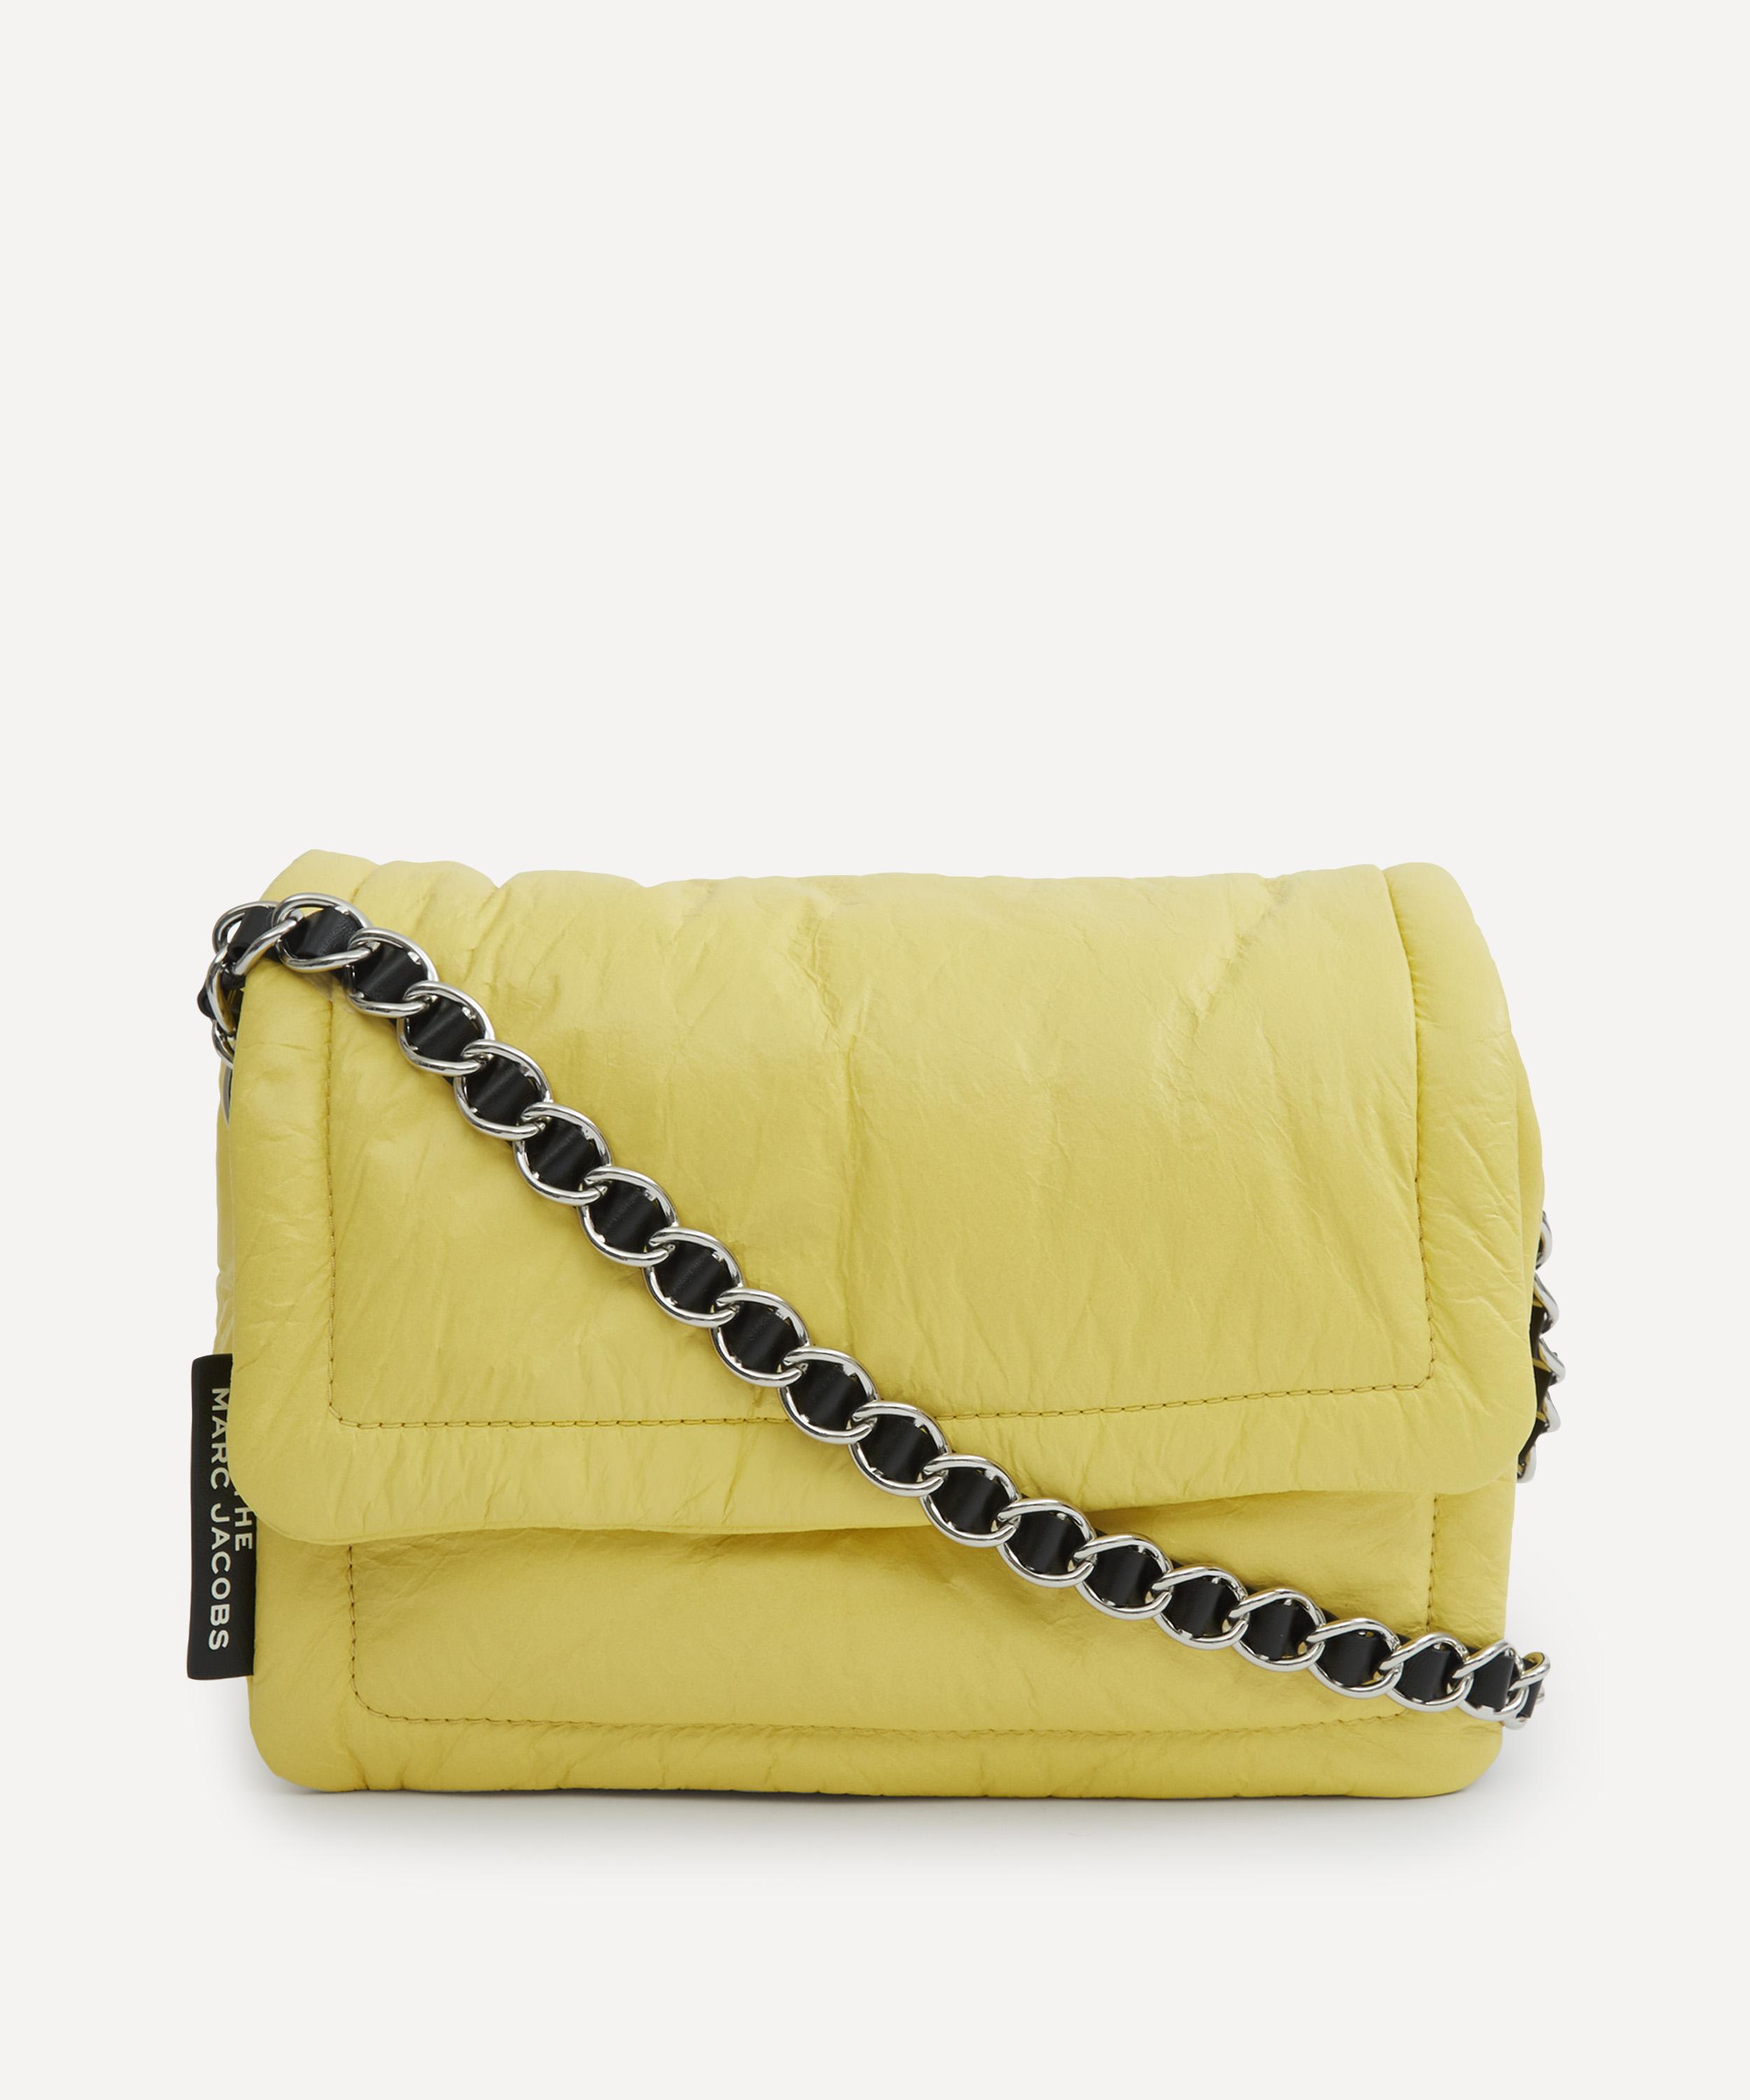 Cross body bags Marc Jacobs - The Pillow bag in Lime color - M0015416327